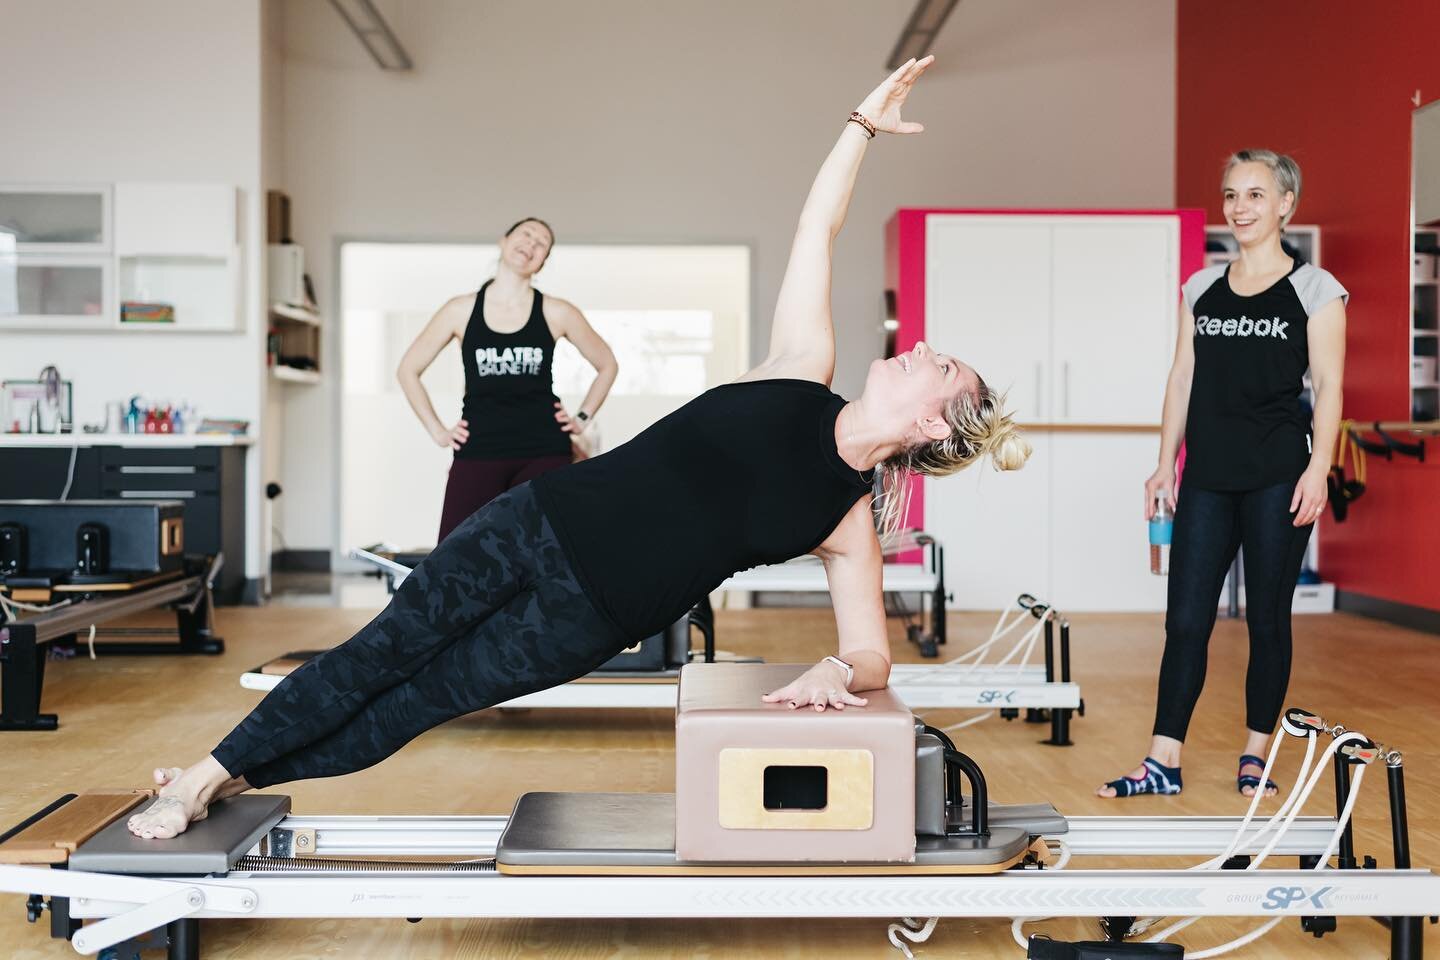 Goals: take Pilates classes at @studiotechnique 
🥵🥵🔥

Everytime I work with Lauren on her branded content I&rsquo;m in AWE of her students! Their strength and ability are huge motivators. 
Added bonus, Lauren being your no.1 hype girl (who also pu